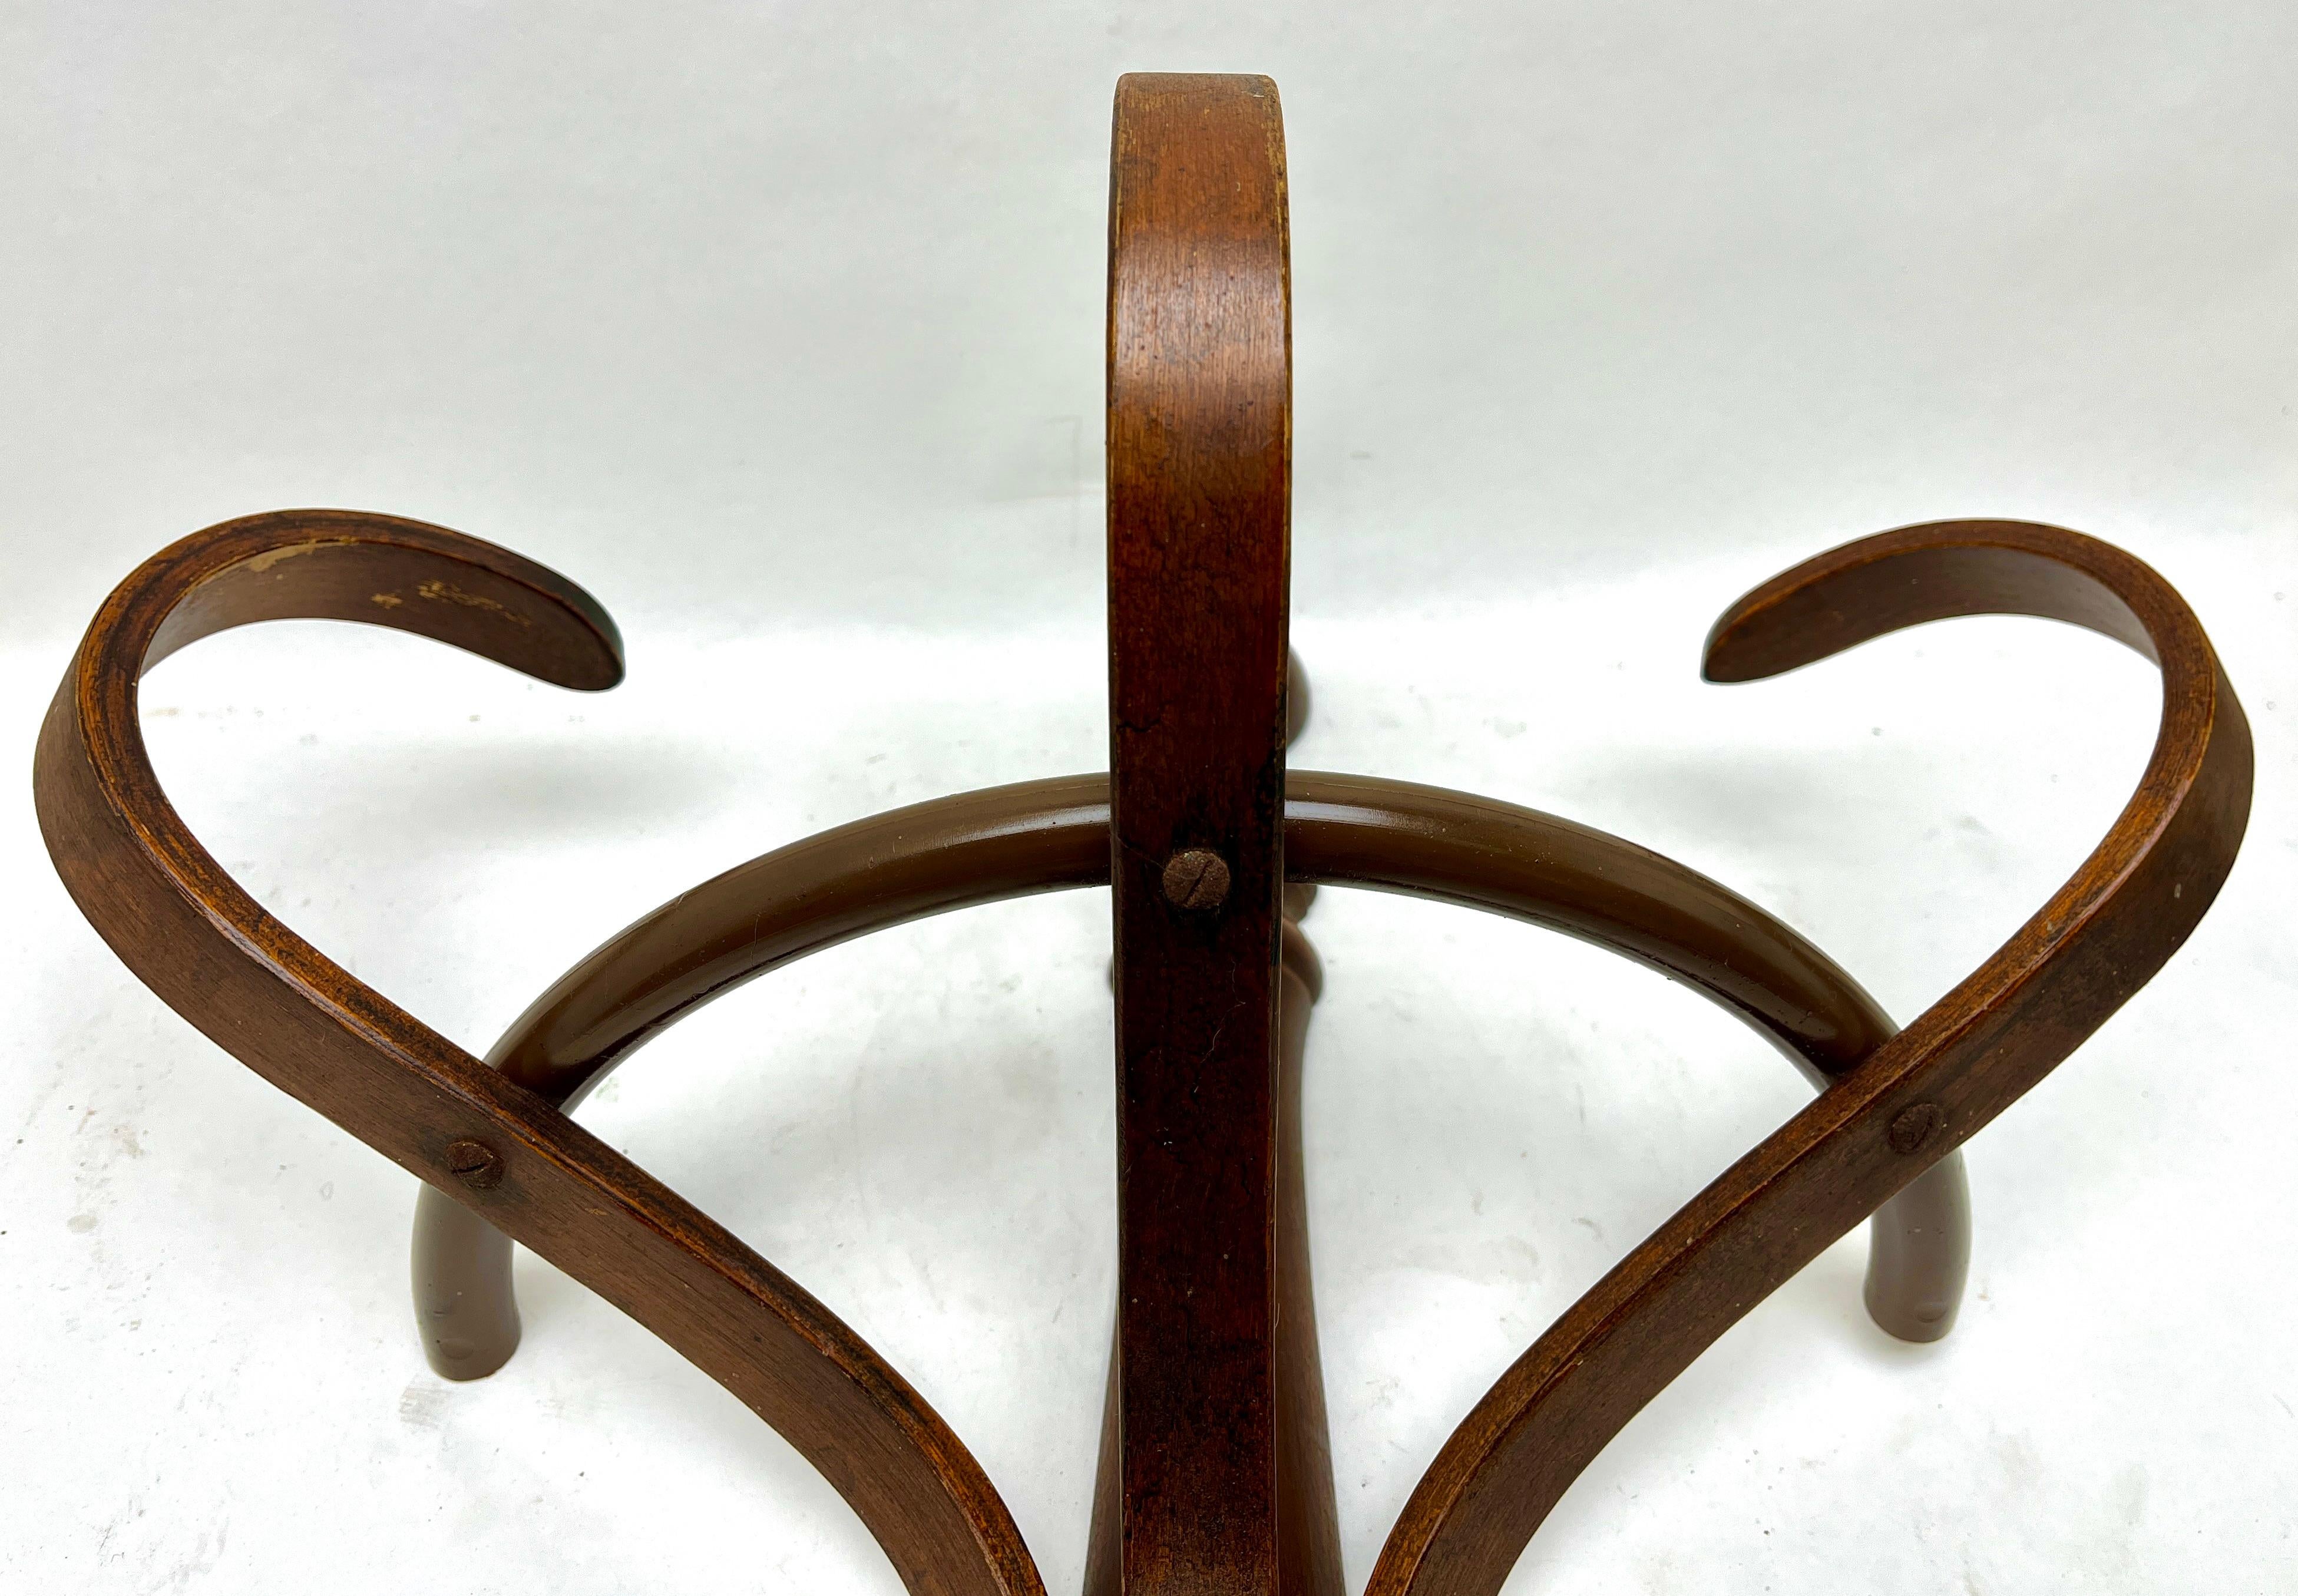 Hand-Crafted Art Nouveau Bentwood Wall Coat Rack Attributed to Thonet, Vienna, 1910s